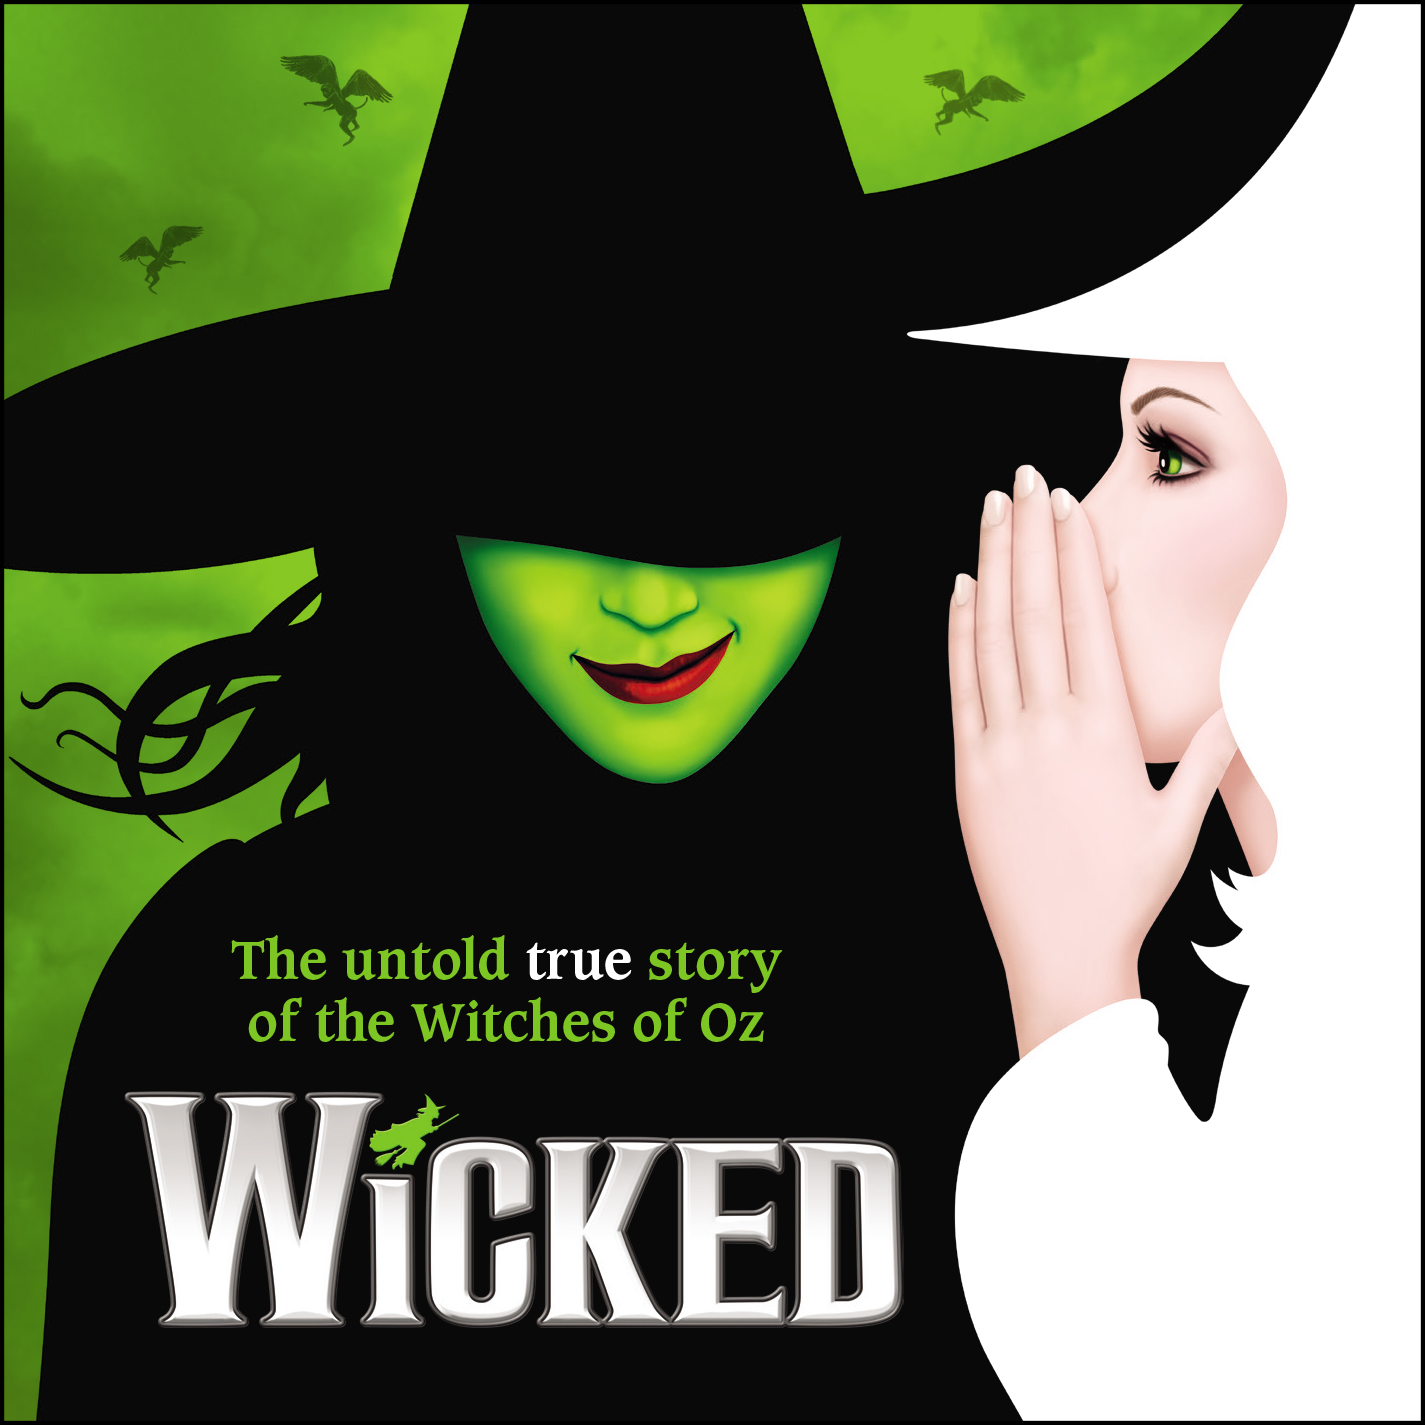 wicked tour cast announcement